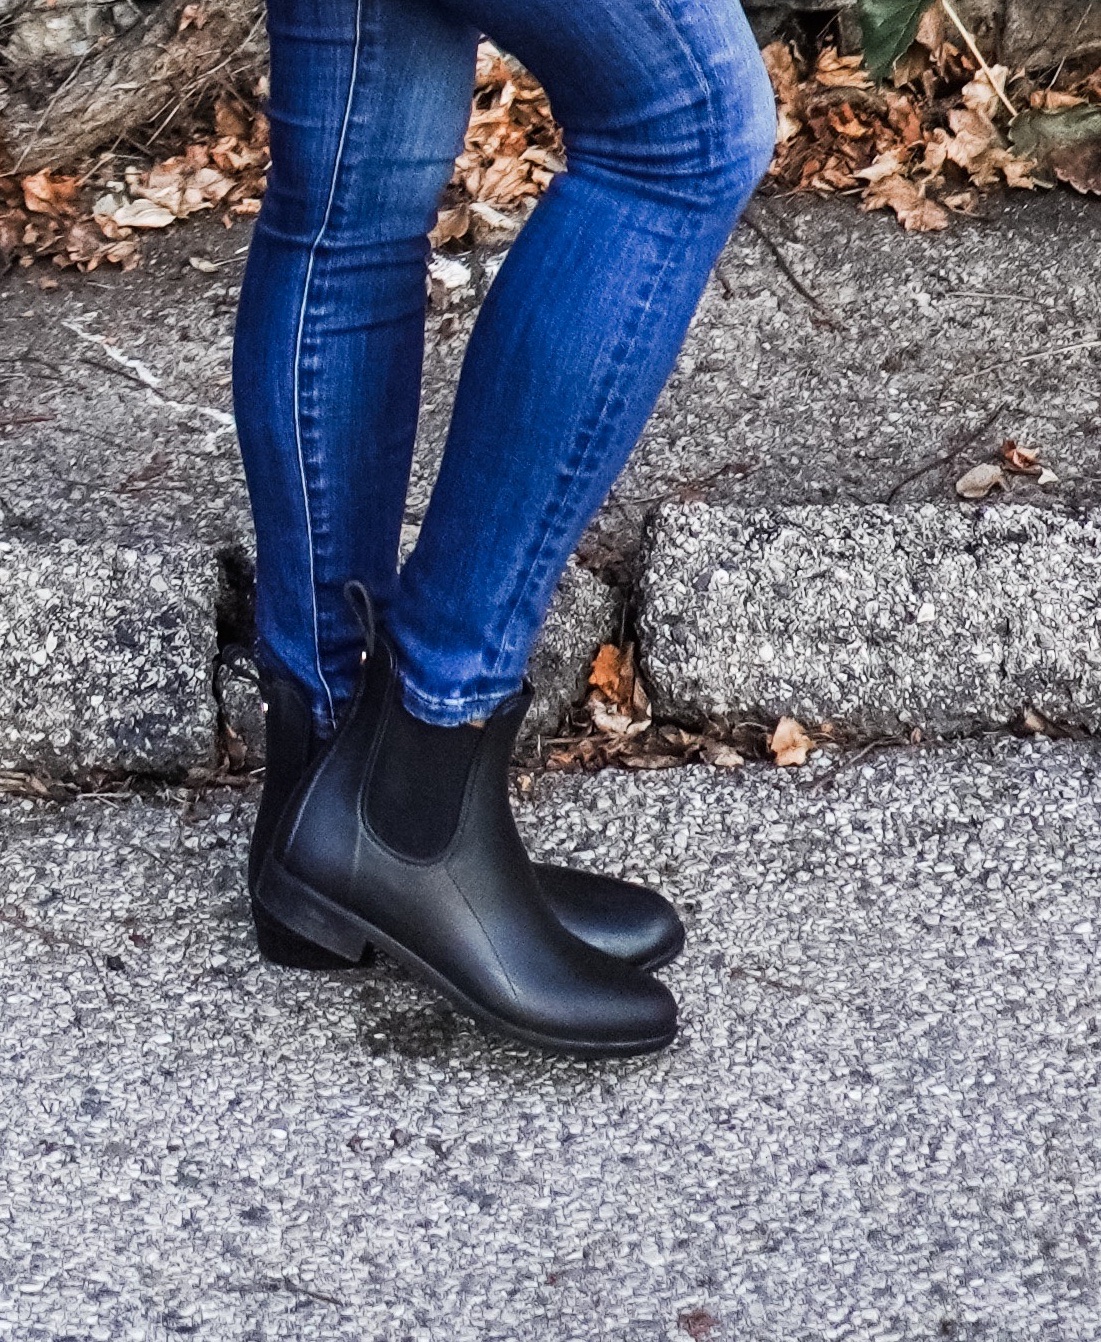 Booties for Fall | Anna Mae Groves